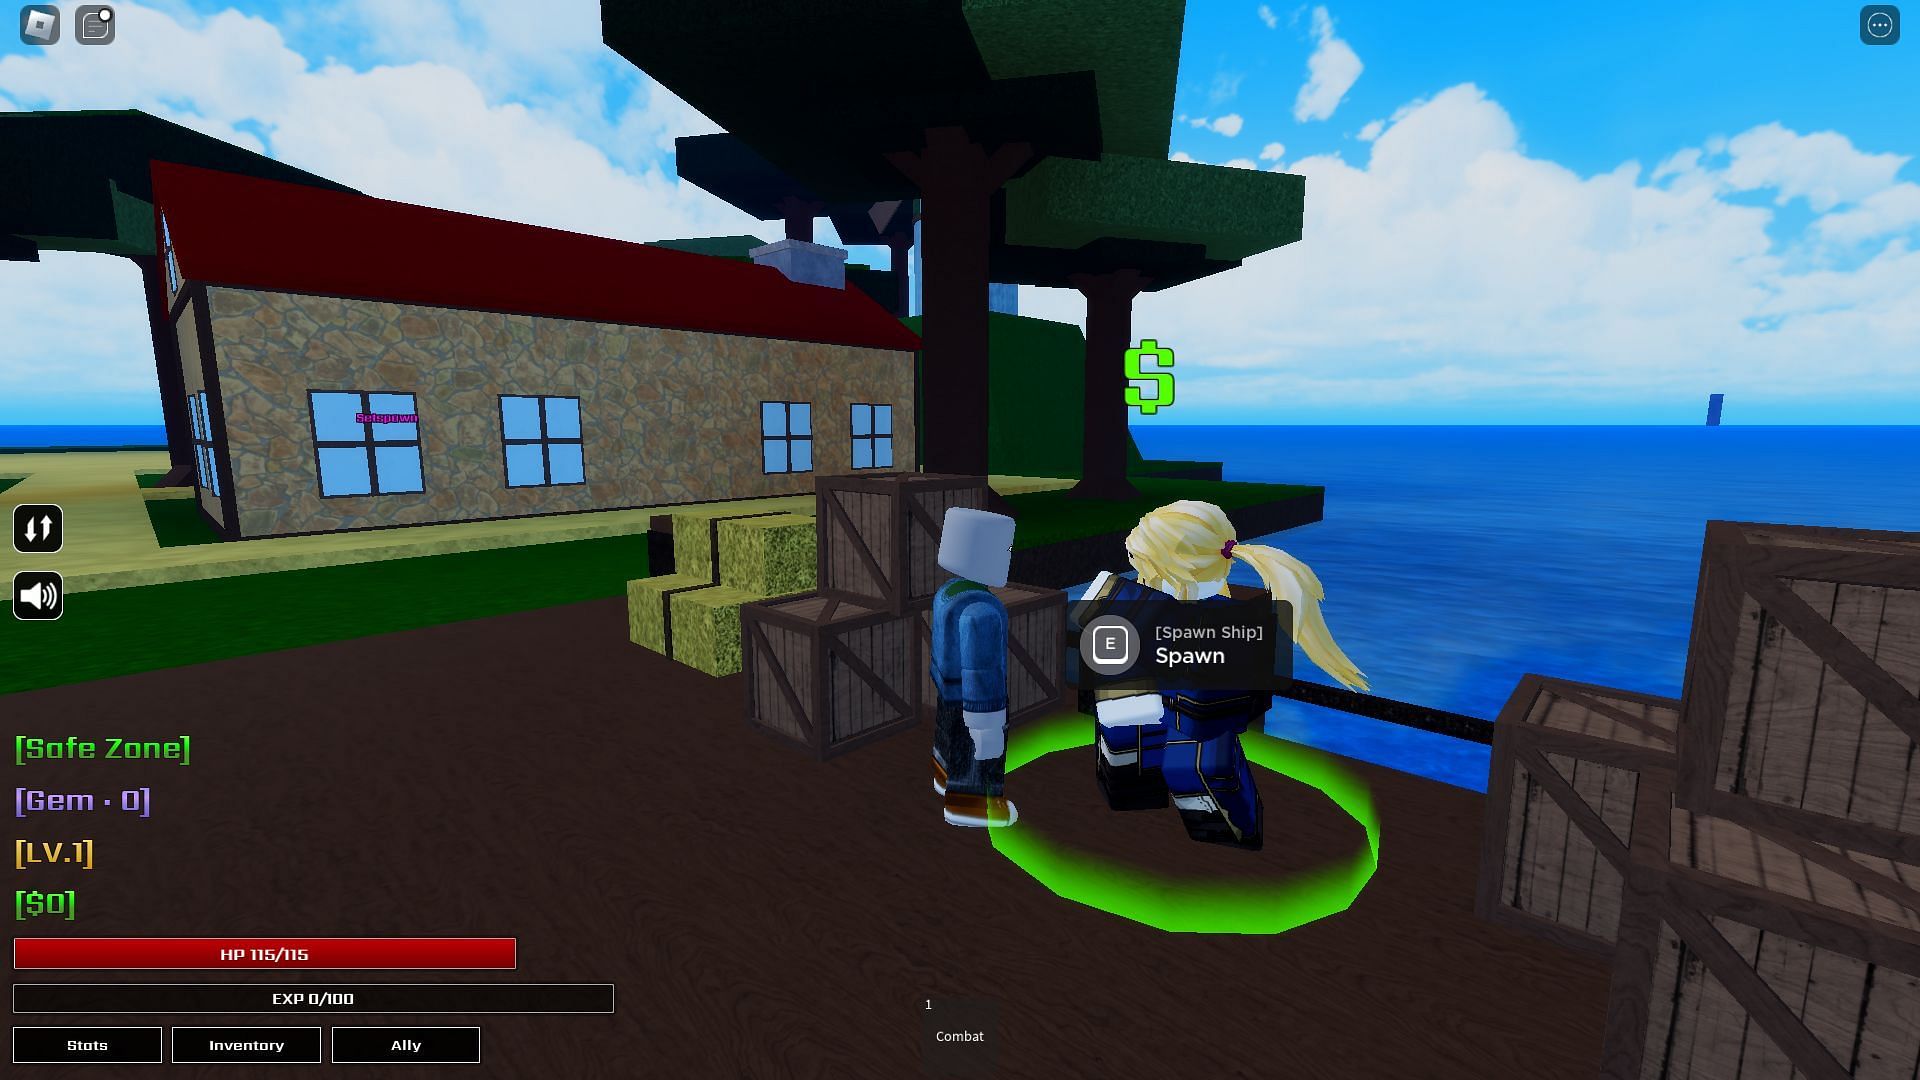 Active codes for Second Piece (Image via Roblox)